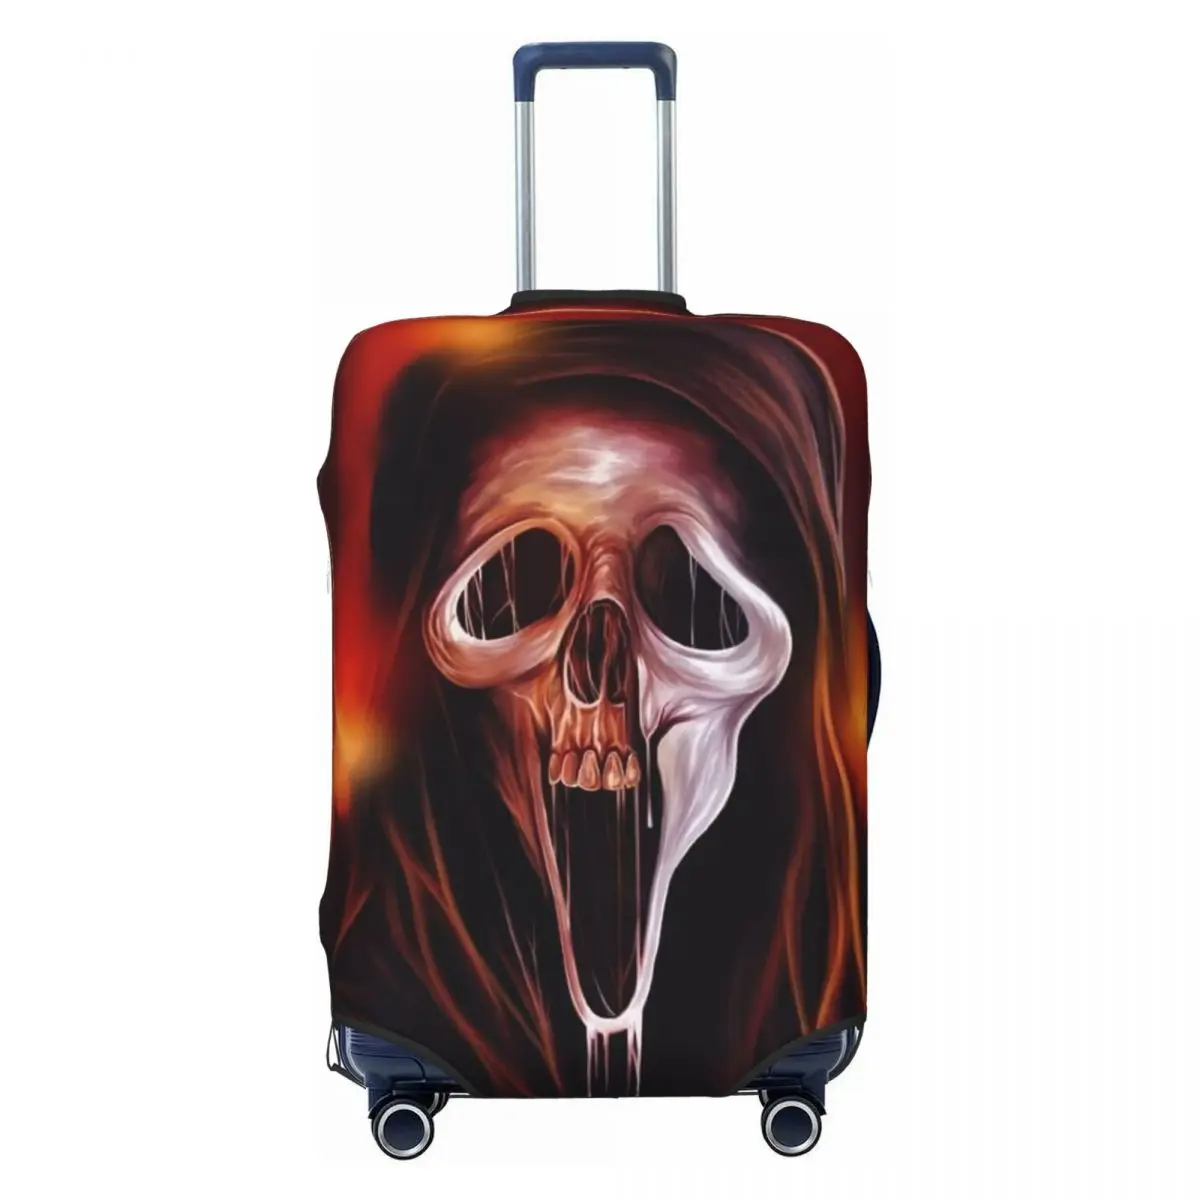 

Halloween Ghost Killer Scream Suitcase Cover Elastic Horror Movie Killer Travel Luggage Covers for 18-32 inch